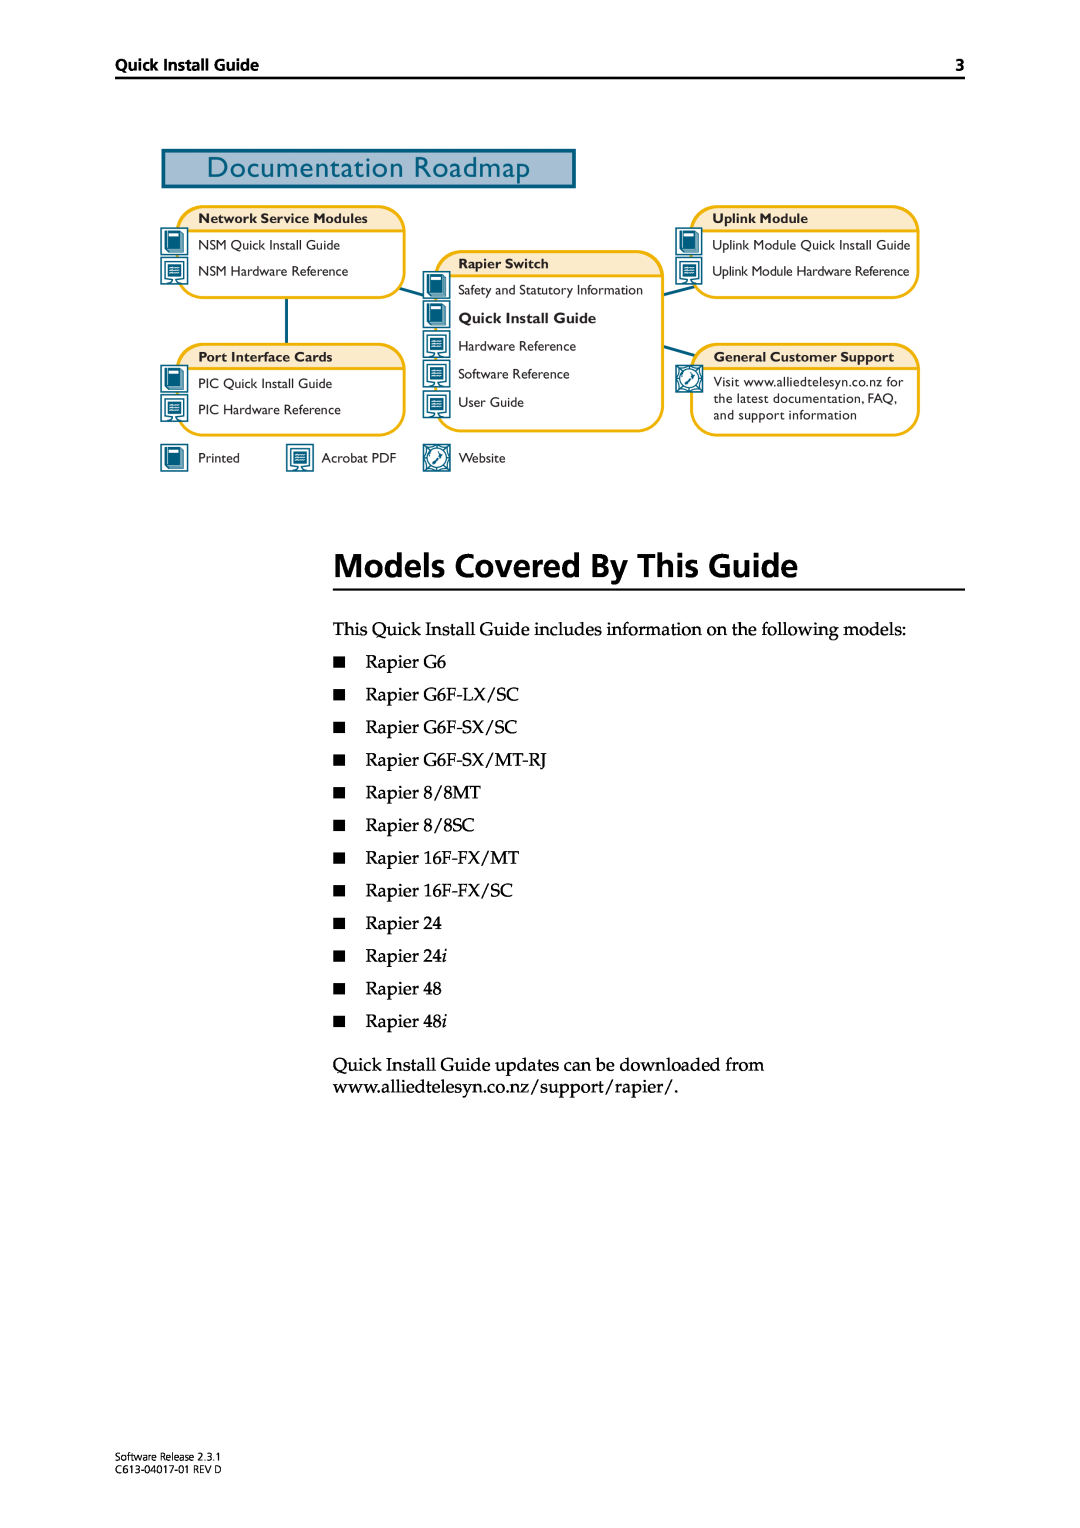 Allied Telesis Rapier Switch manual Models Covered By This Guide, Documentation Roadmap 